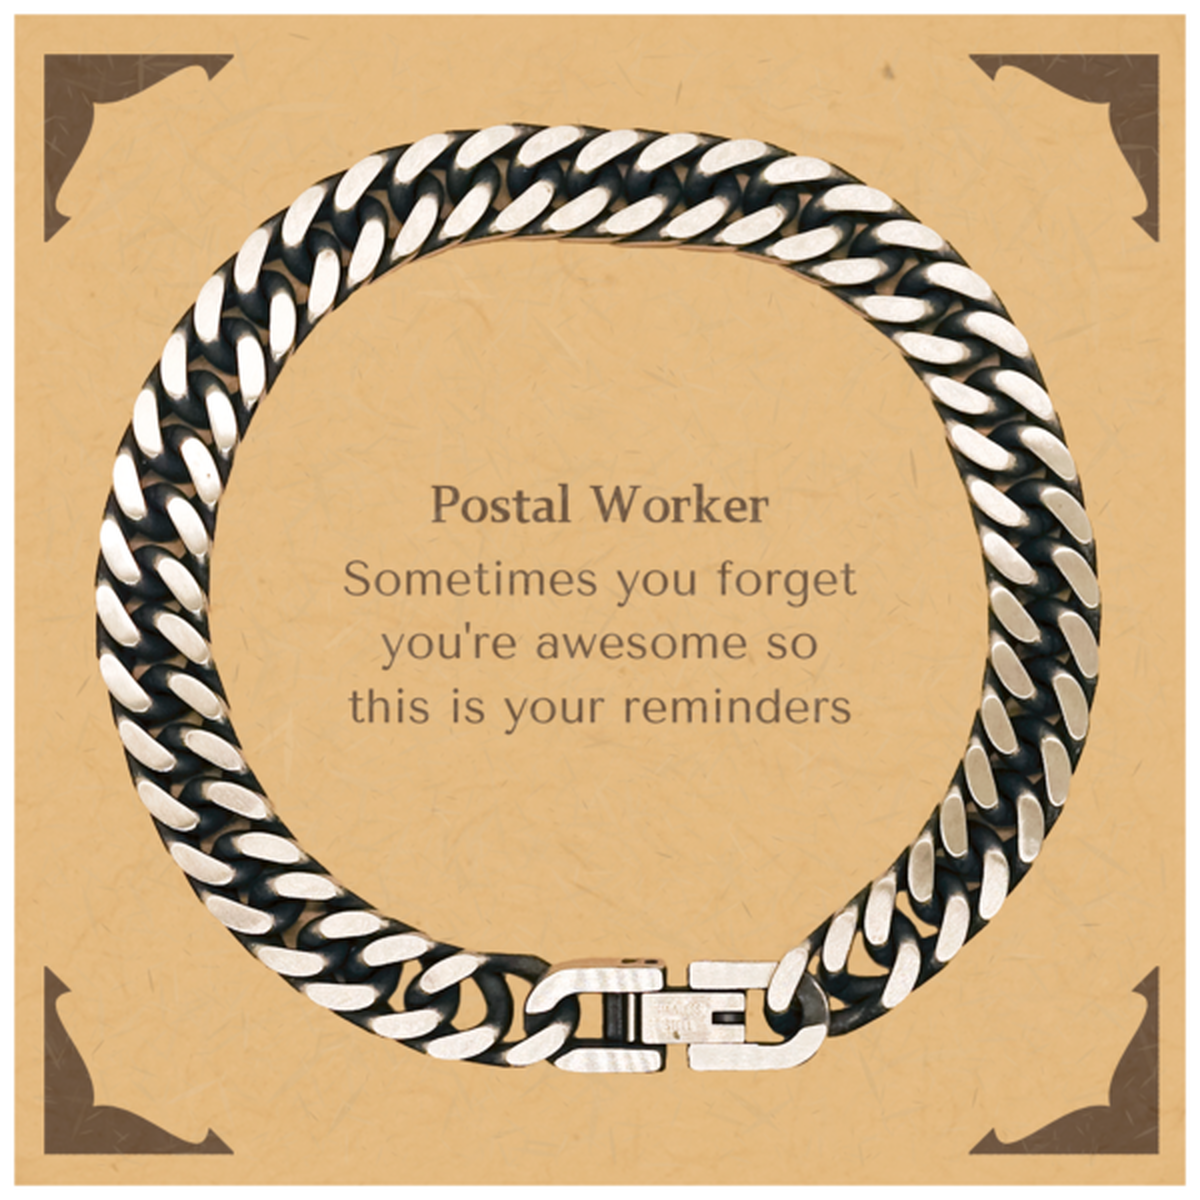 Sentimental Postal Worker Cuban Link Chain Bracelet, Postal Worker Sometimes you forget you're awesome so this is your reminders, Graduation Christmas Birthday Gifts for Postal Worker, Men, Women, Coworkers